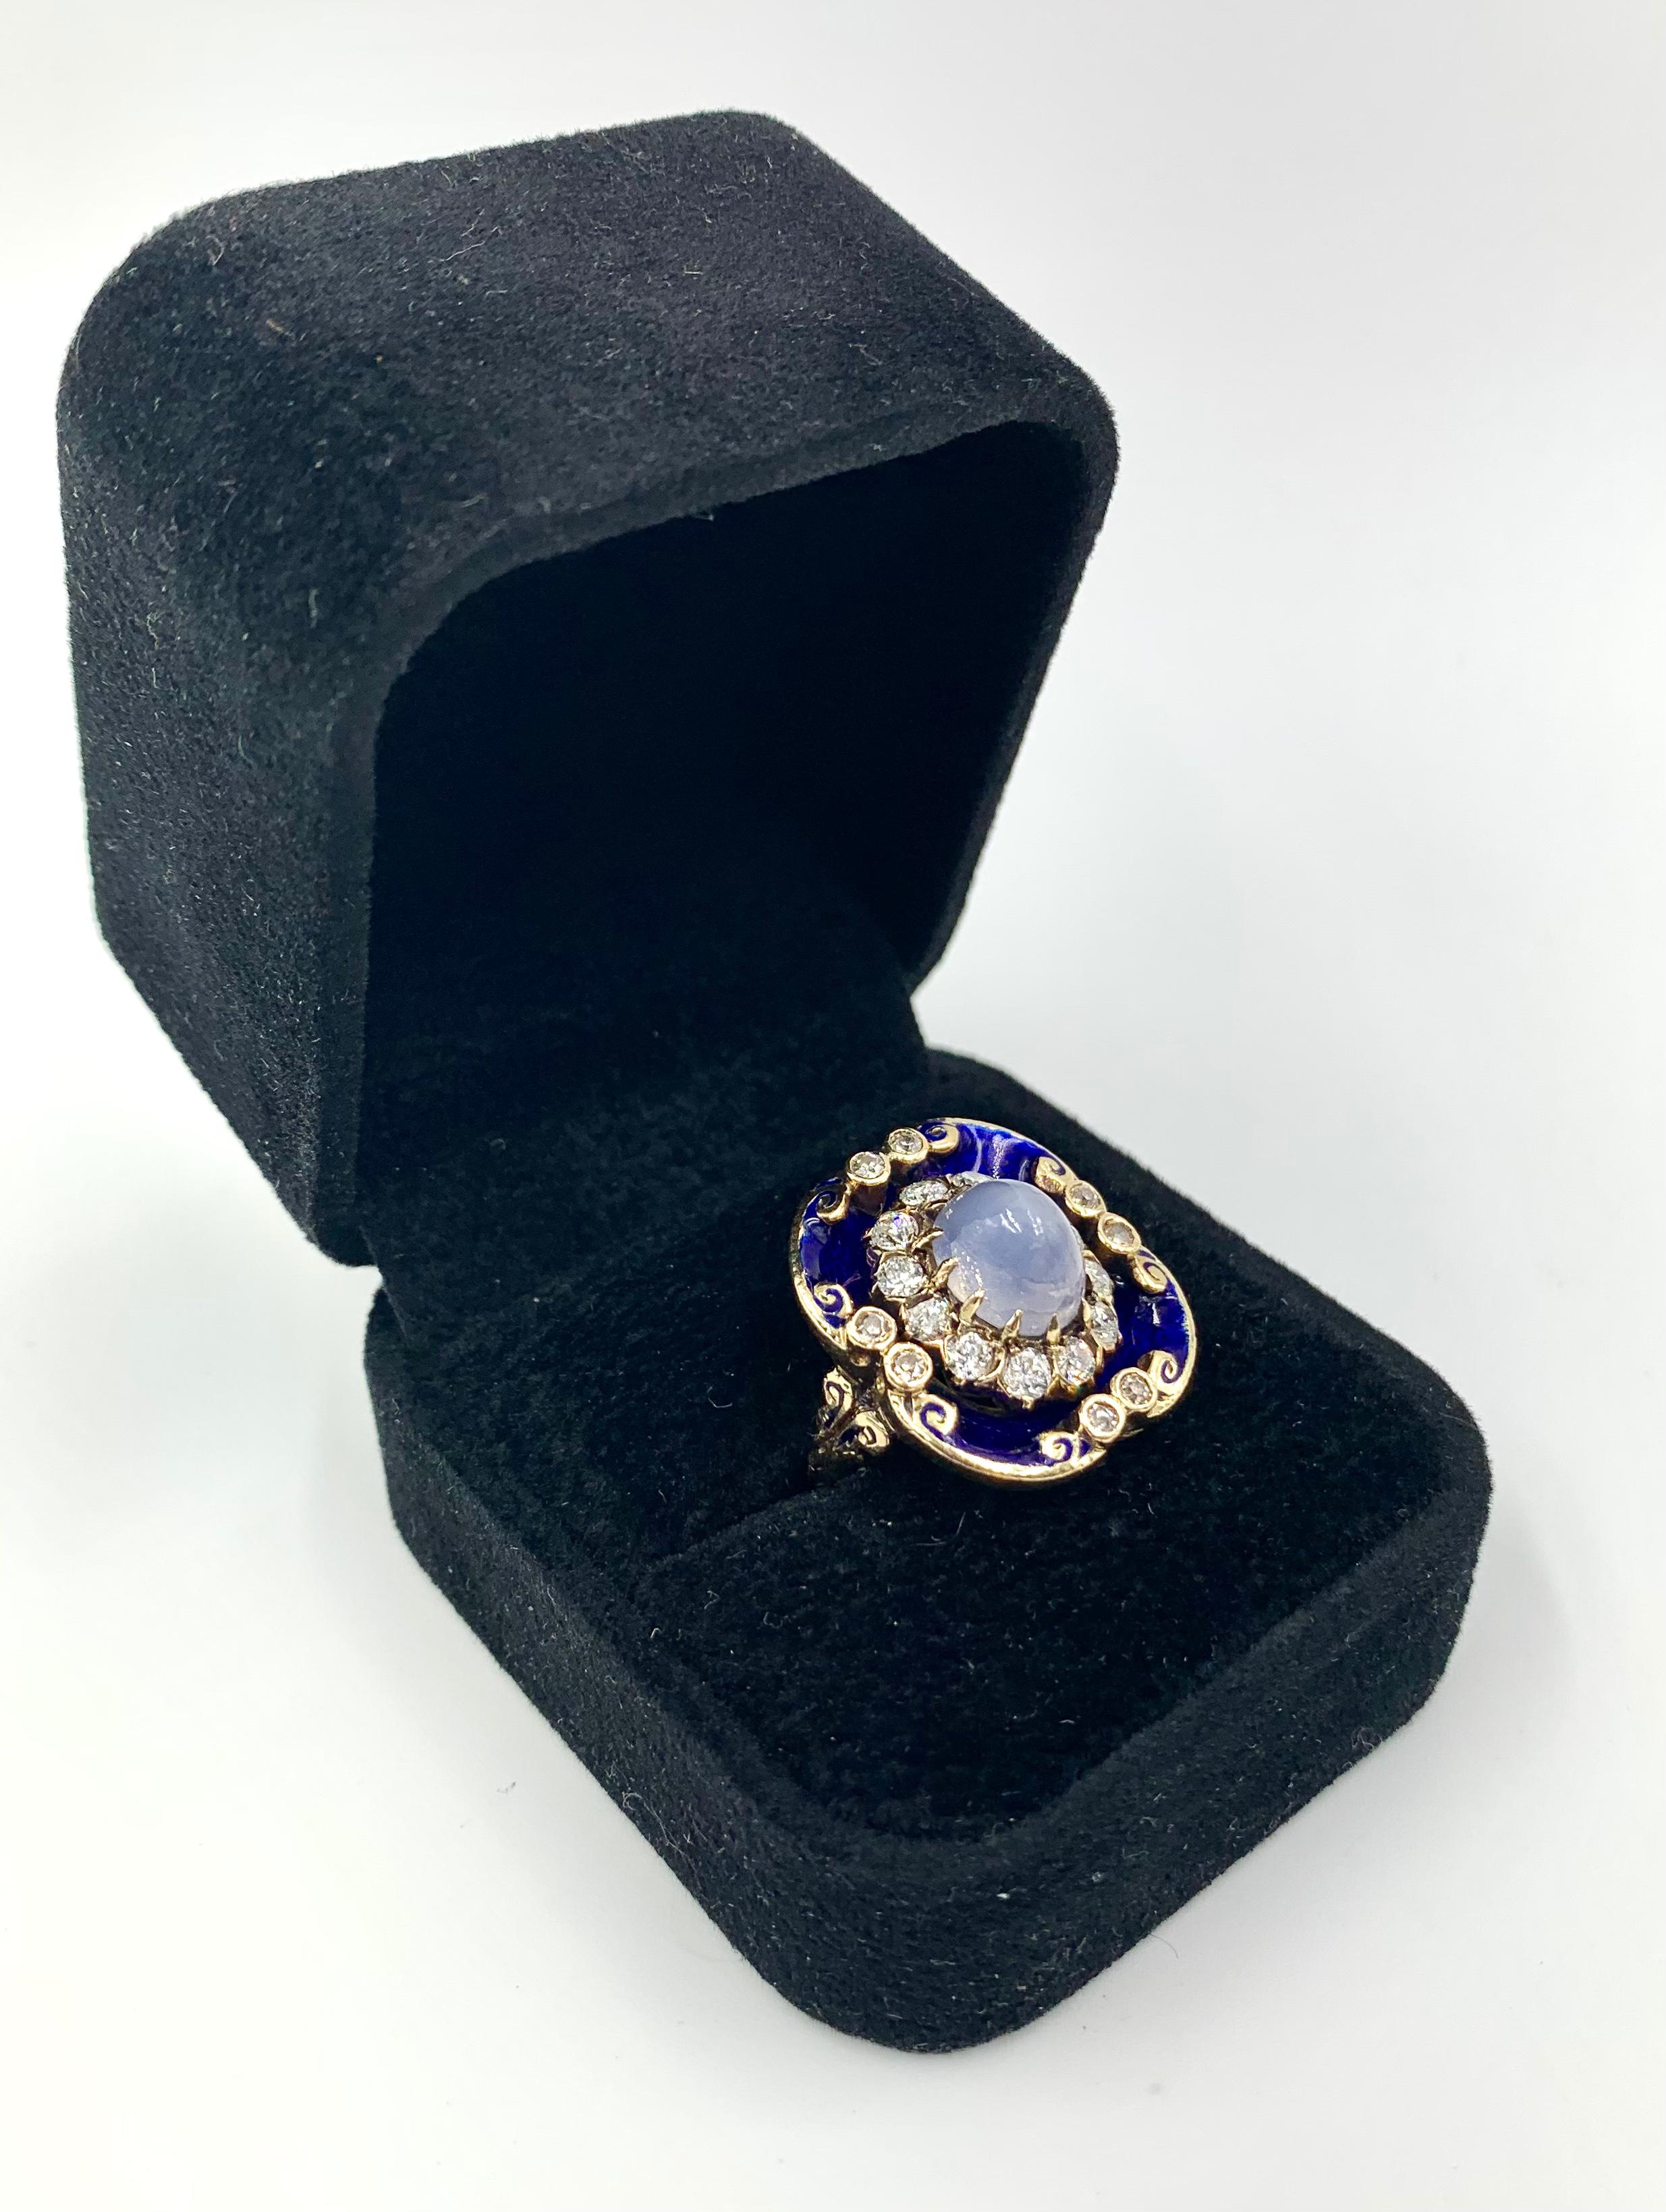 Stunning Georgian Period cabochon star sapphire, diamond, cobalt blue guilloche enamel 14K gold ring.
Circa 1830
This beautiful antique ring dates from the George IV/Regency Period. The Georgian Jewelry Era (1714-1837) is widely admired for